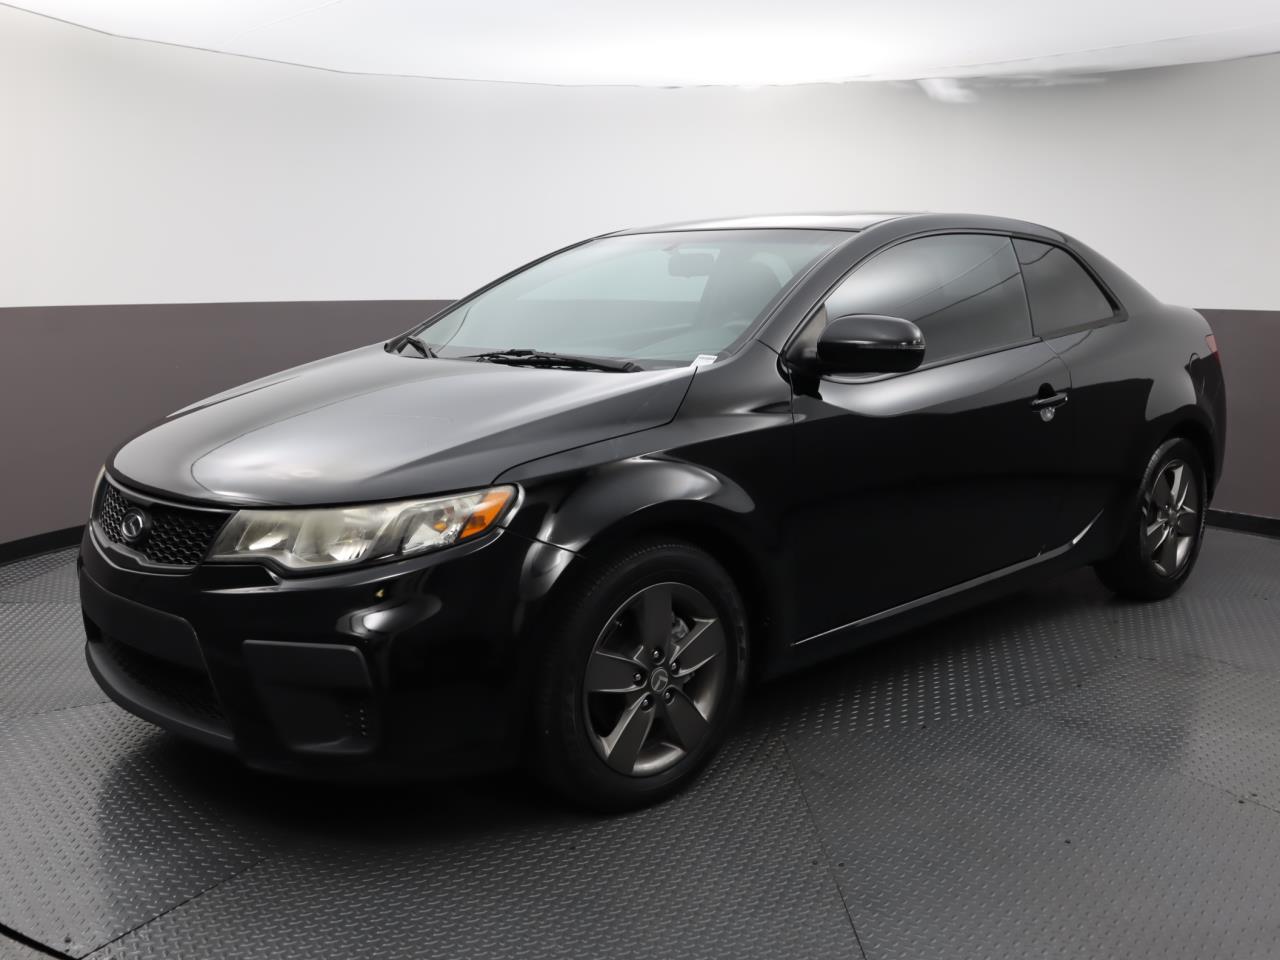 Used 2012 KIA FORTE KOUP EX for sale in WEST PALM | 117728